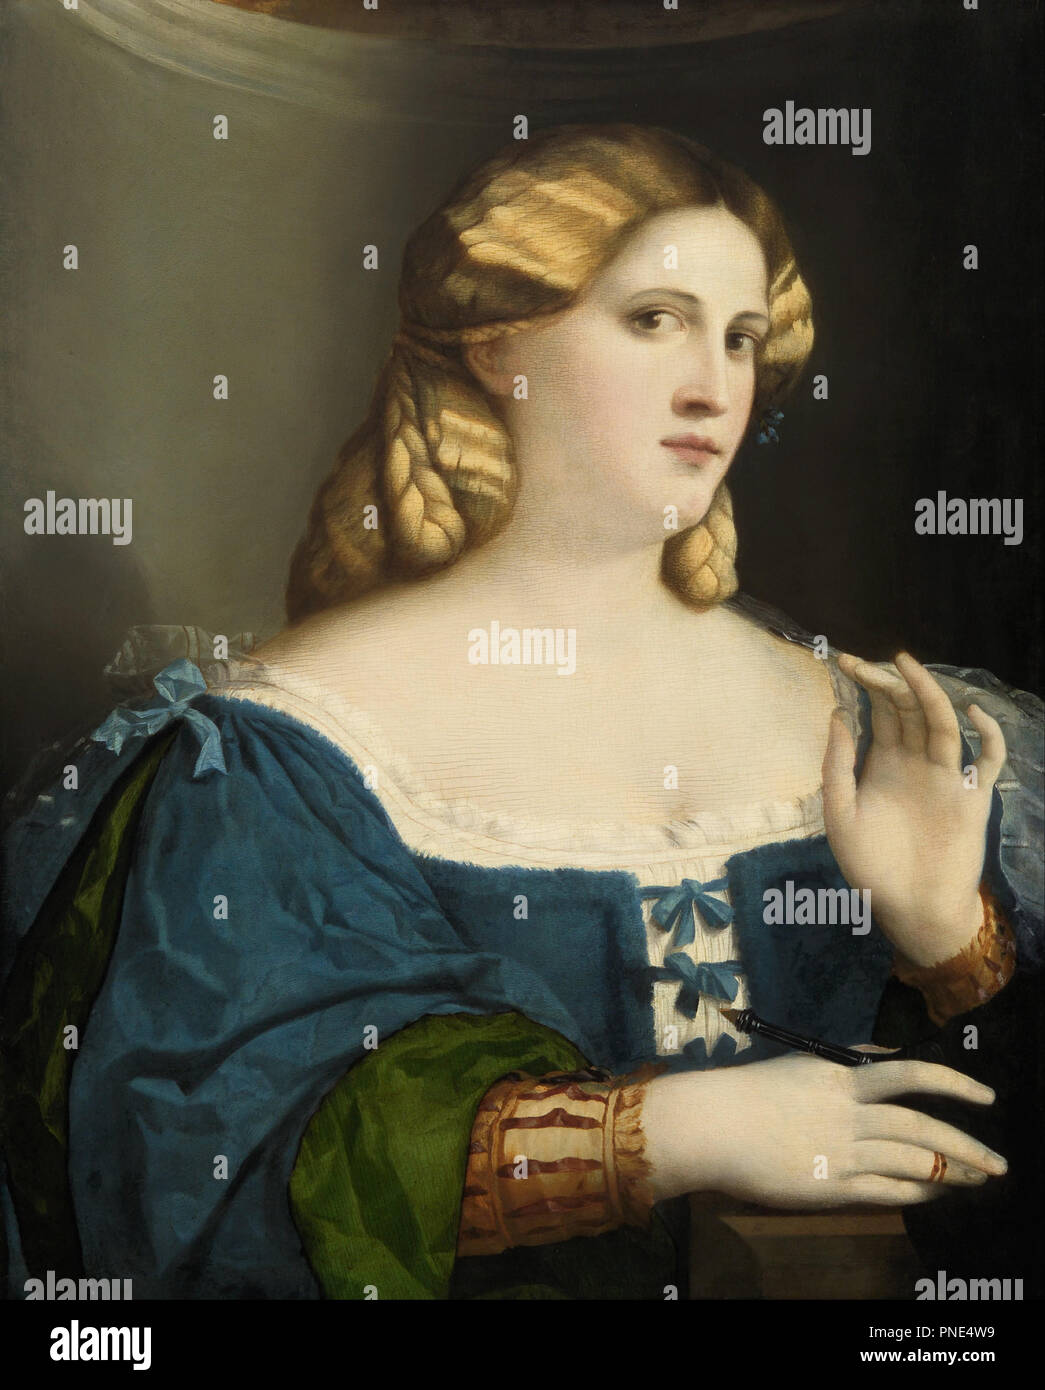 Young Woman in a Blue Dress, with Fan. Date/Period: 1512 - 1514. Painting. Oil. Height: 635 mm (25 in); Width: 510 mm (20.07 in). Author: Jacopo Negretti, called Palma il Vecchio. Palma Vecchio (Jacopo Nigretti). Palma il Vecchio, Jacopo, the Elder. Stock Photo